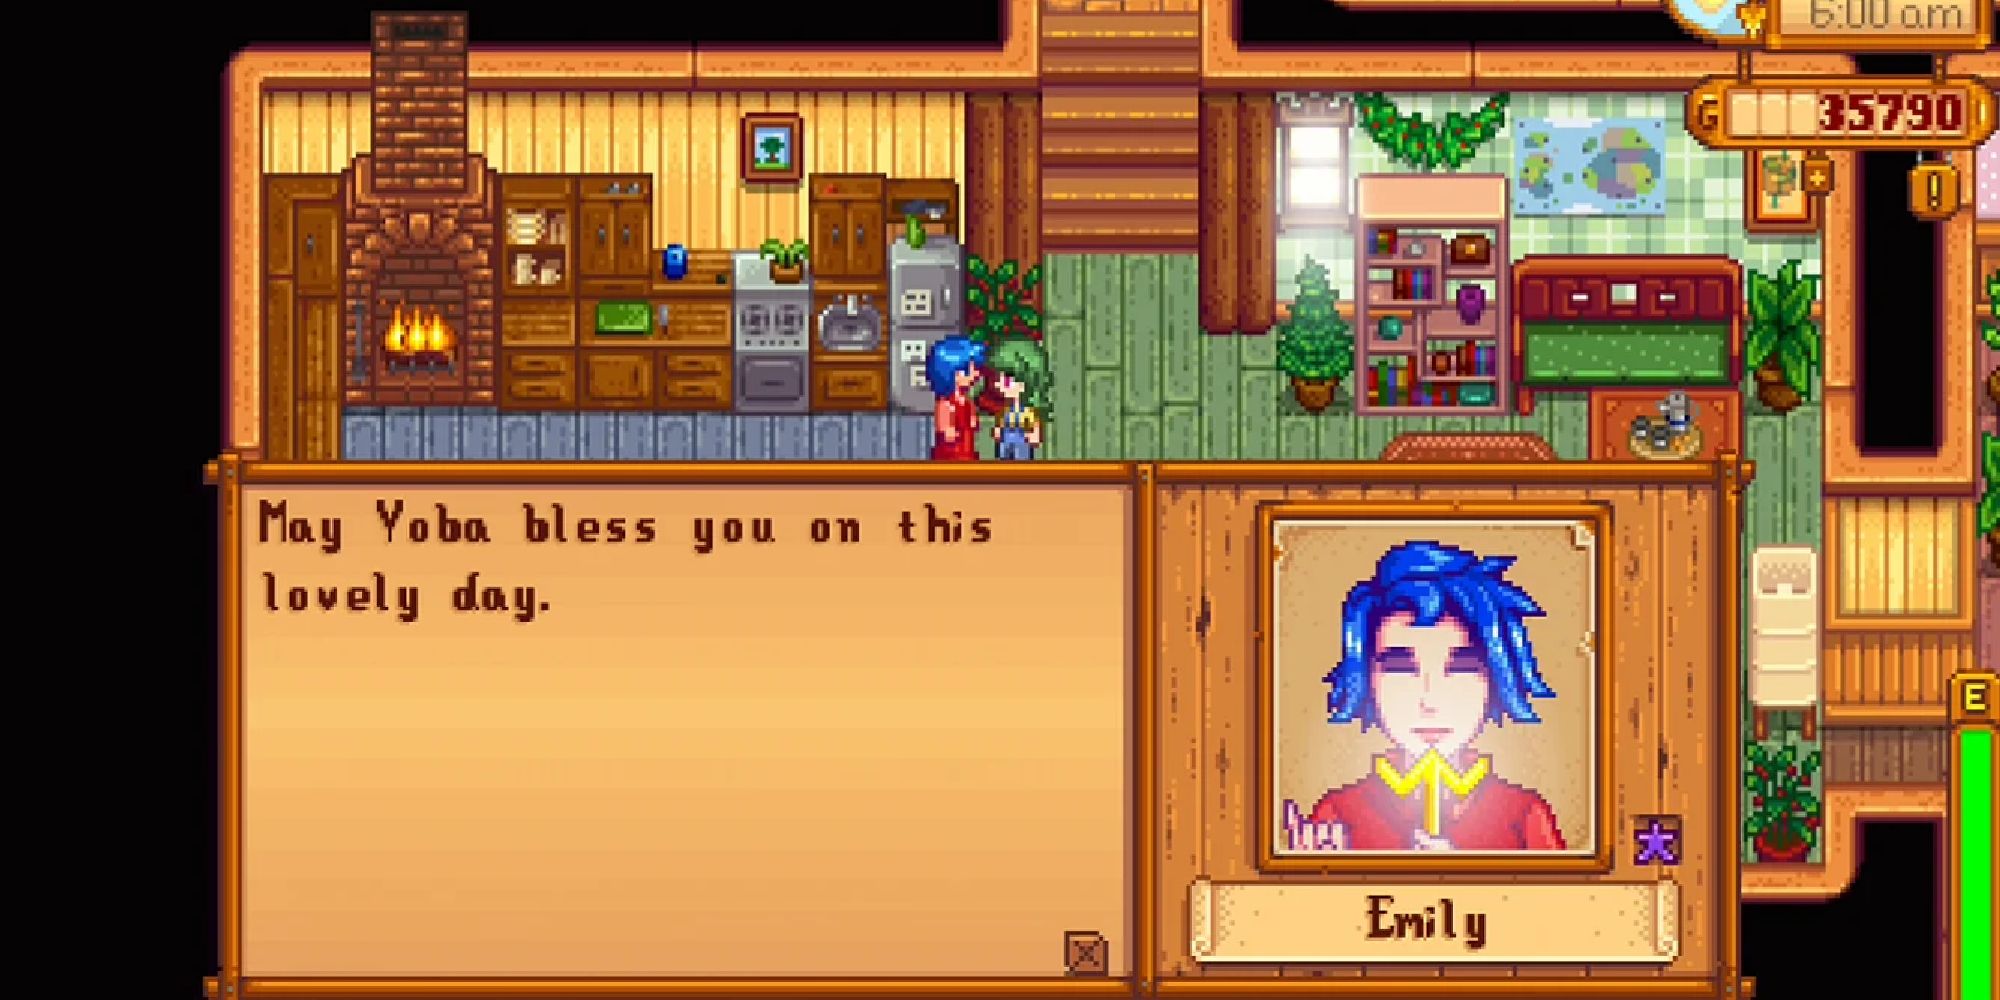 emily wishing the player a lovely day through yoba